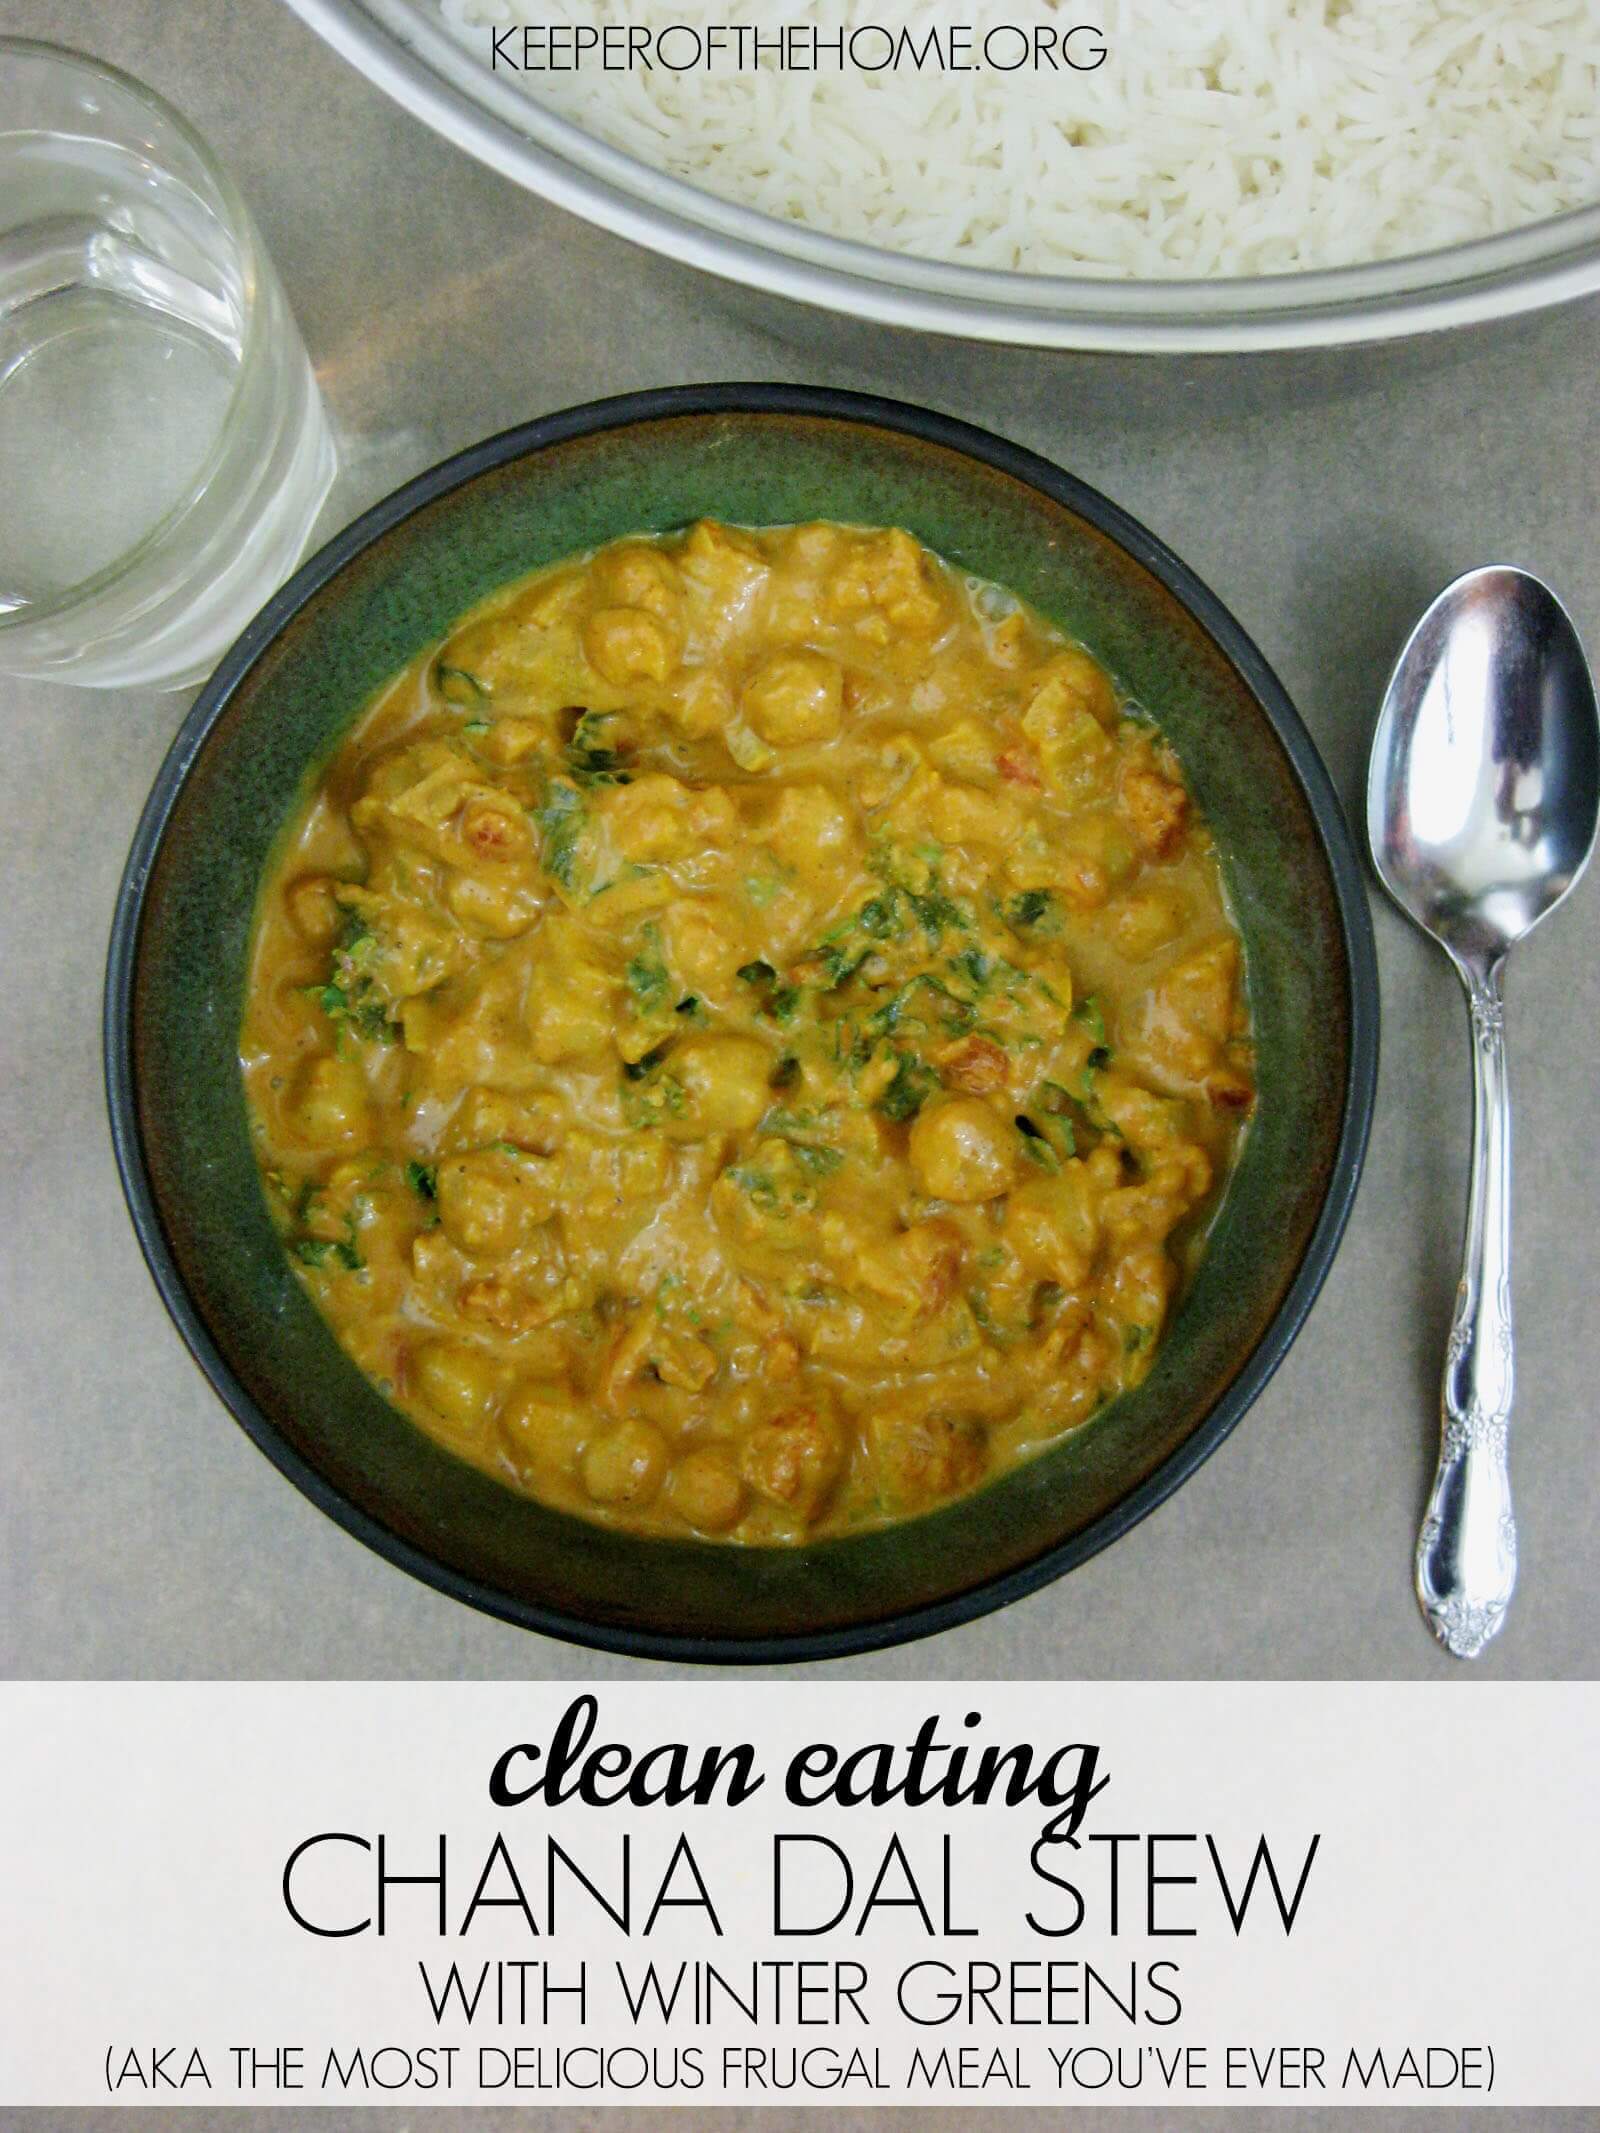 Looking for a winter dish that pleases everyone, while still being frugal, easy, and nourishing?? This Chana Dal Stew with Winter Greens is all that and more – make sure you make extra of this real food curry dish!